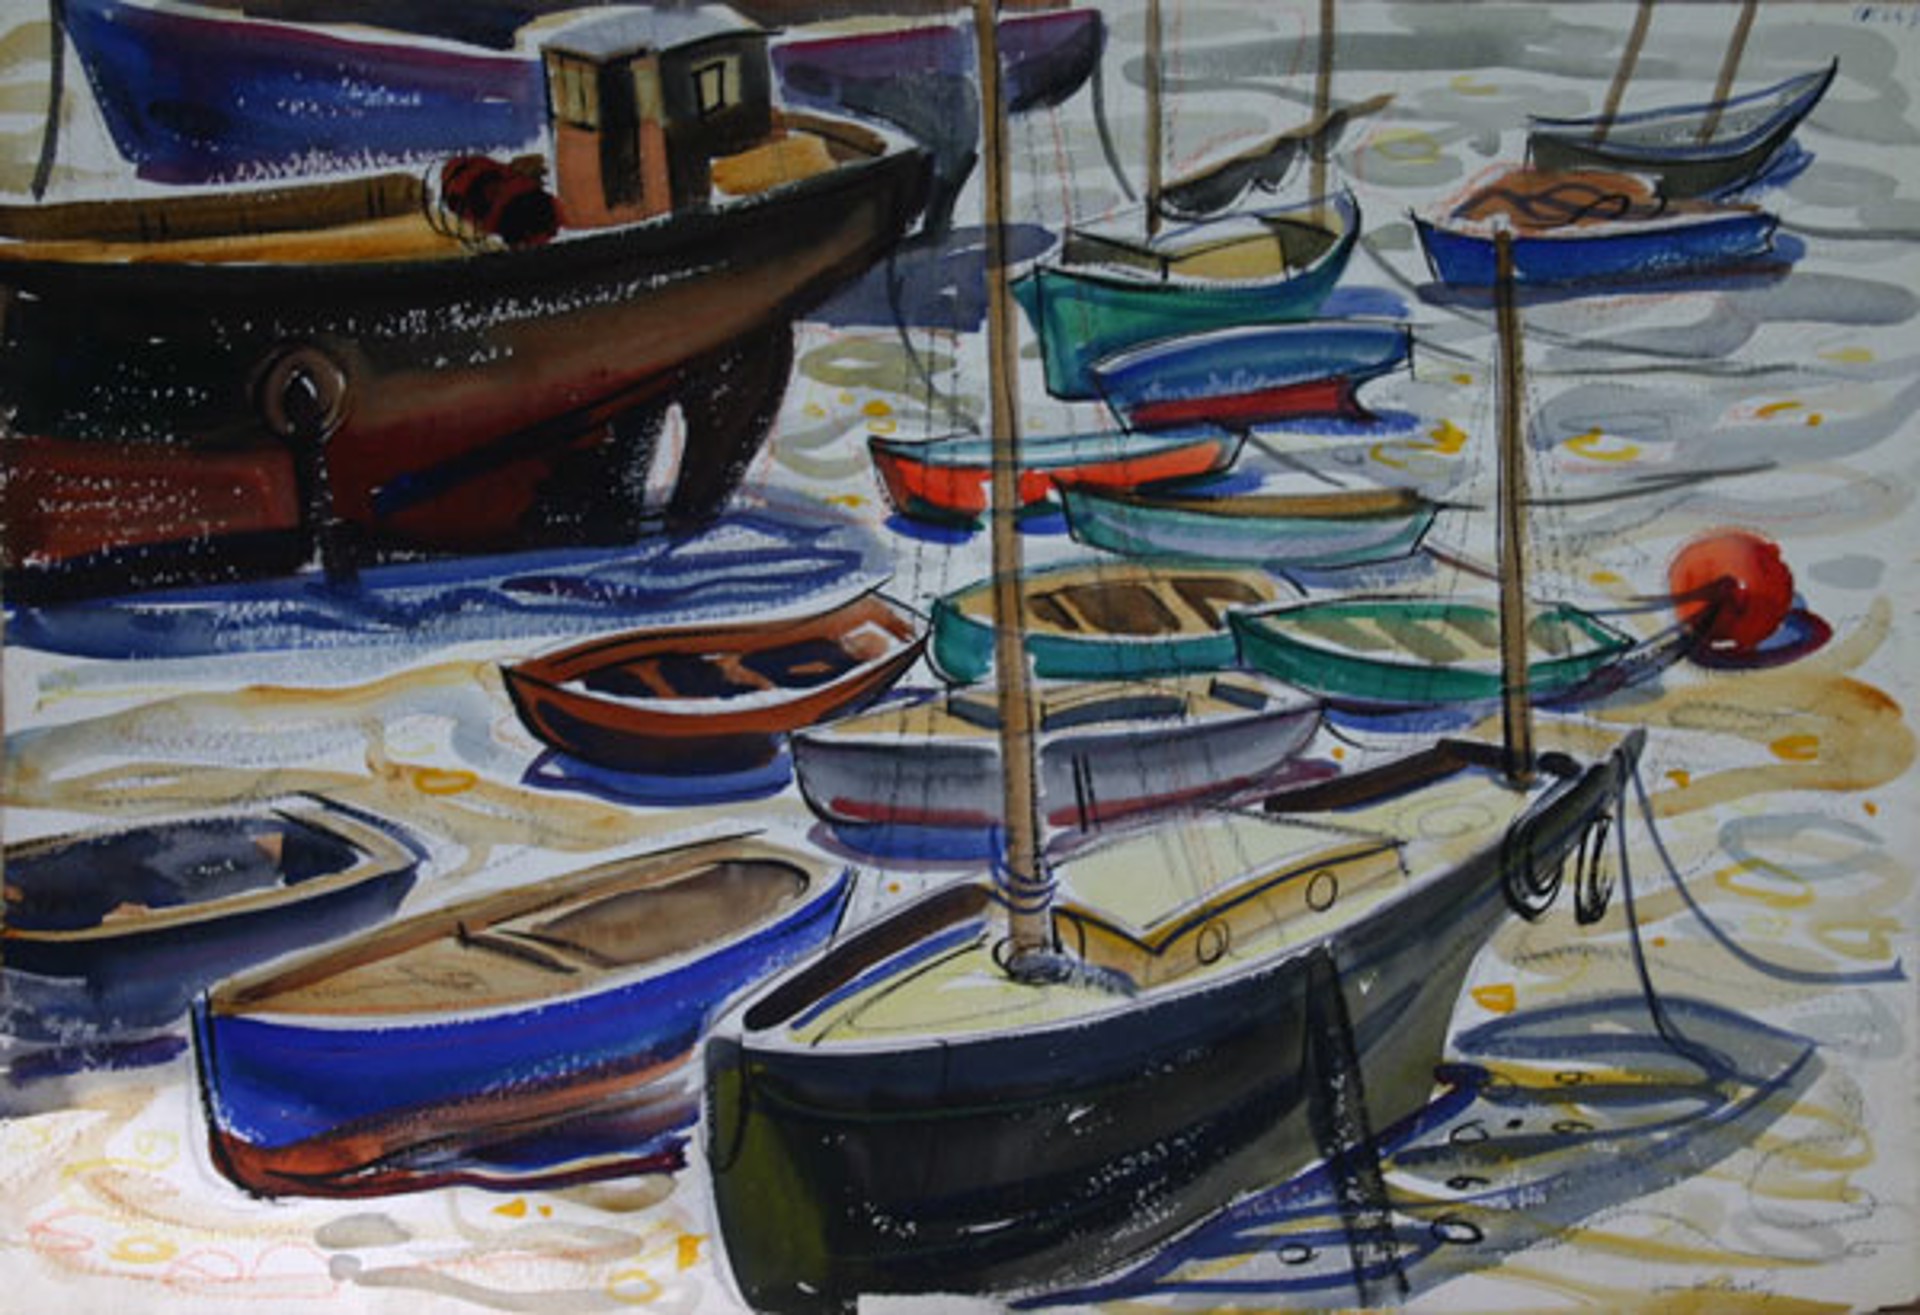 Boats at Brixham, Devon (Little Boats at Low Tide) by Doris McCarthy